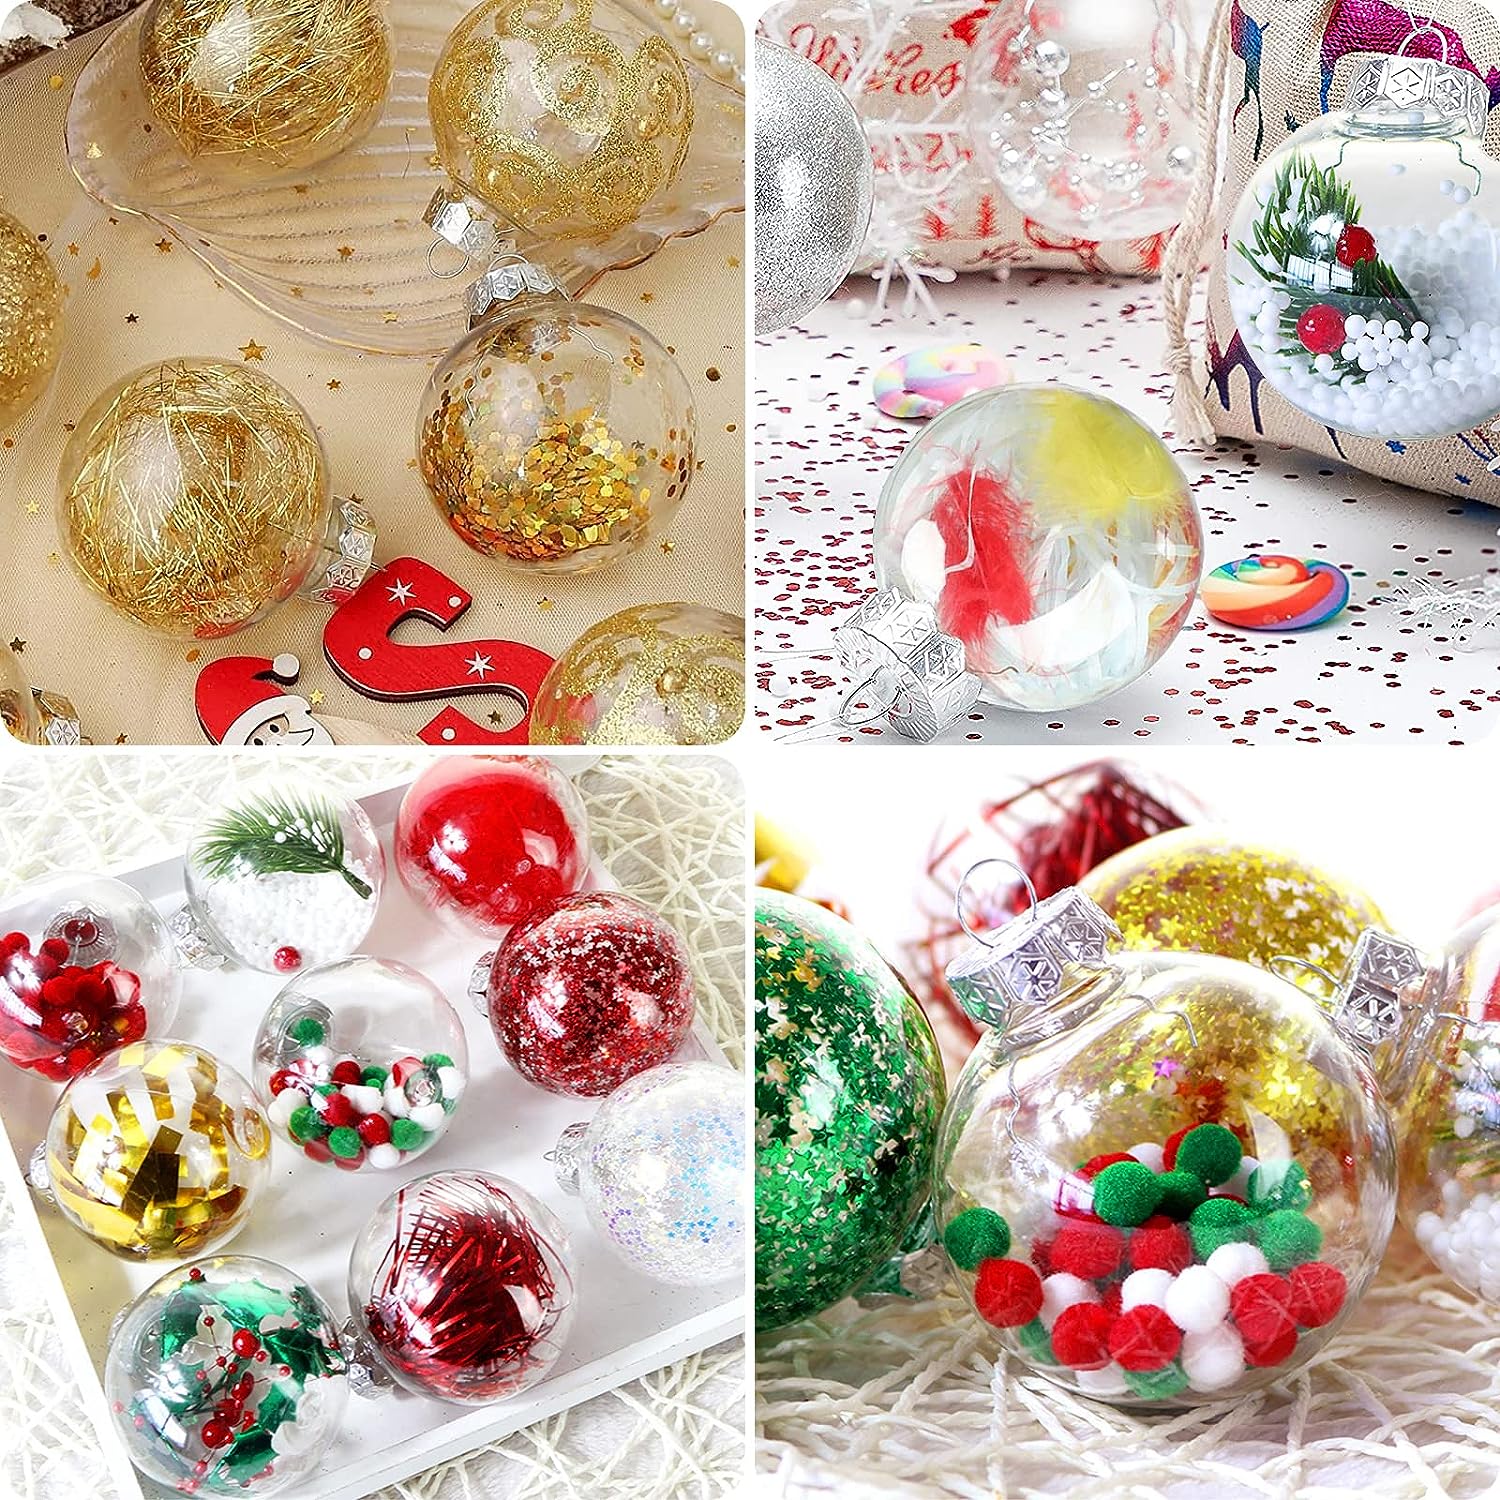 10PCS 3.15 Inch Removable Top Clear Hanging Ornaments Ball,Clear Plastic  Fillable Balls Ornament, DIY Plastic Ornaments Round Balls, Perfect for